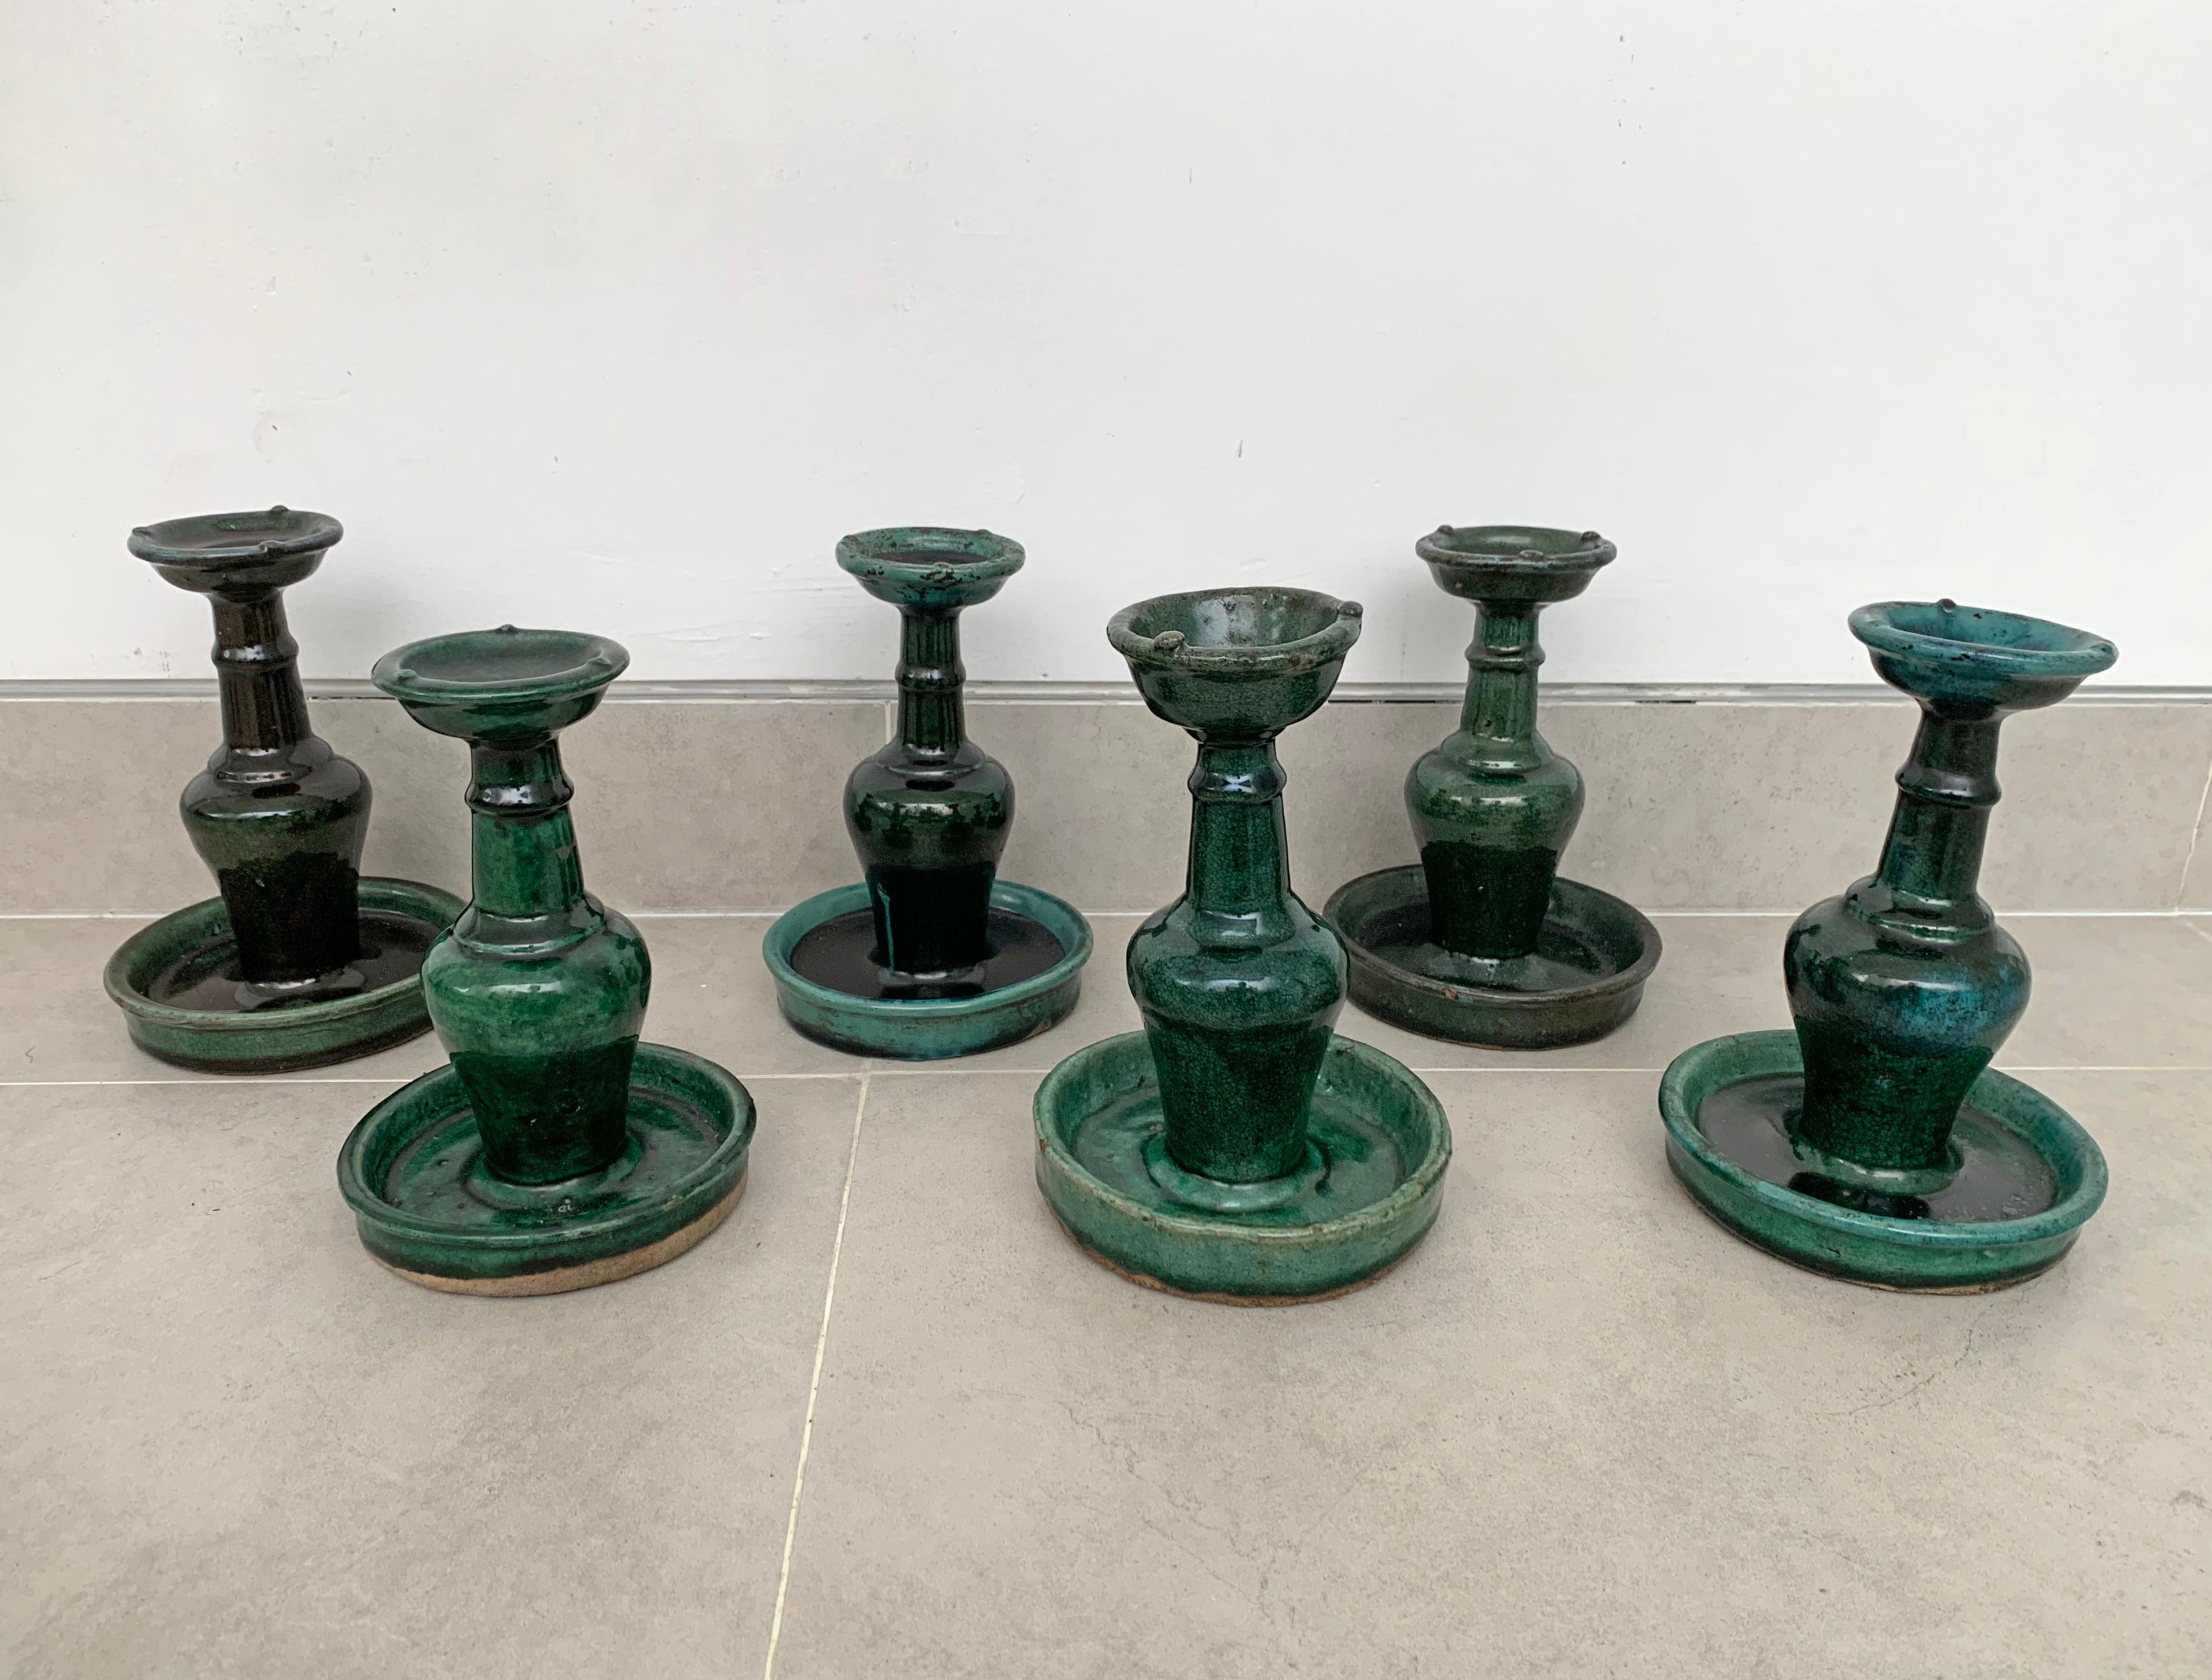 This set of 6 Shiwan ware oil lamps from the early 20th century feature the distinctive green glaze. Shiwan ware is a style of Chinese pottery from the Shiwanzhen district near Guangdong, China. 

Each oil lamp is of roughly similar dimensions;